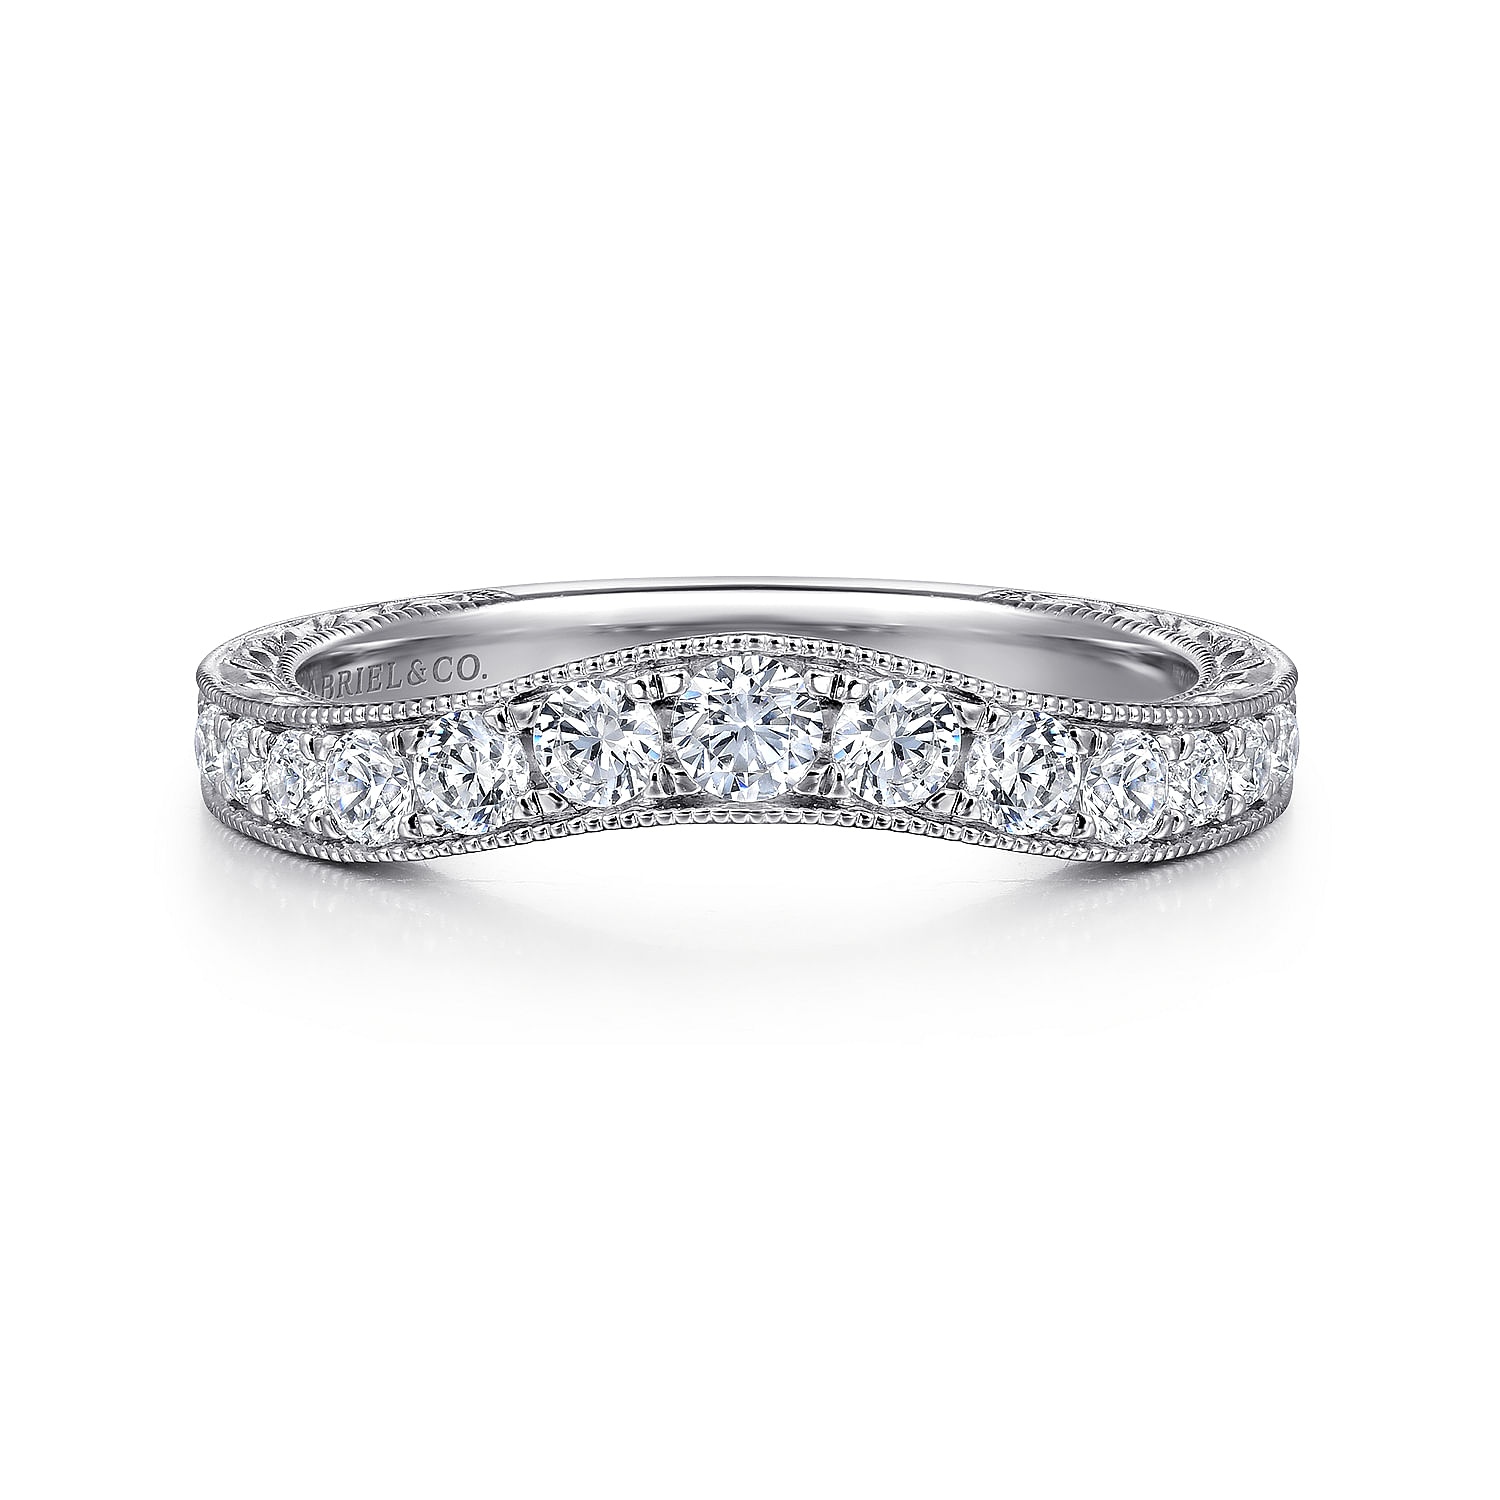 Gabriel - Vintage Inspired 14K White Gold Curved Channel Set Diamond Wedding Band with Engraving